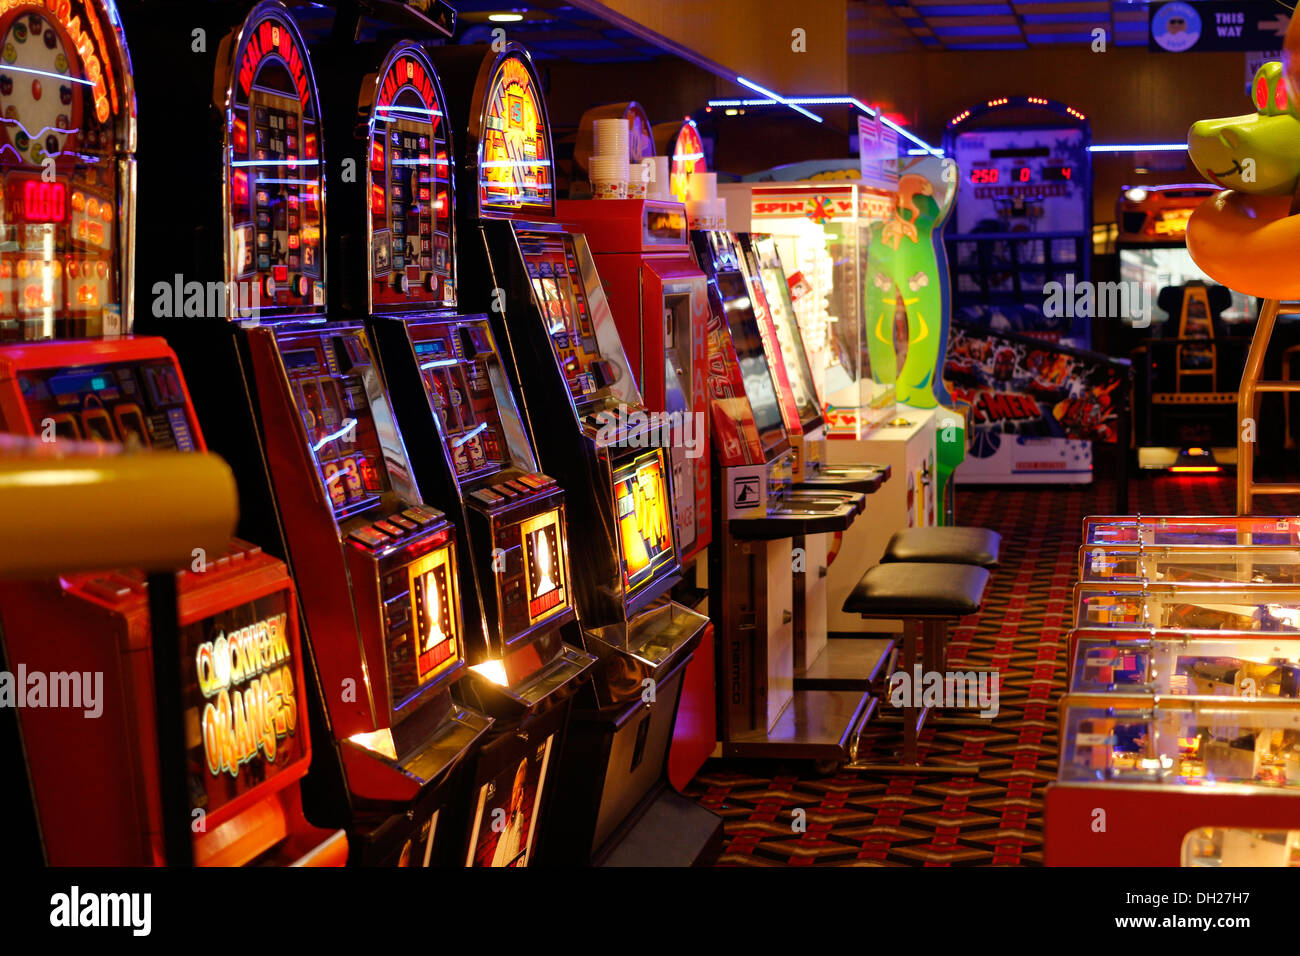 Are gambling arcades legal in florida